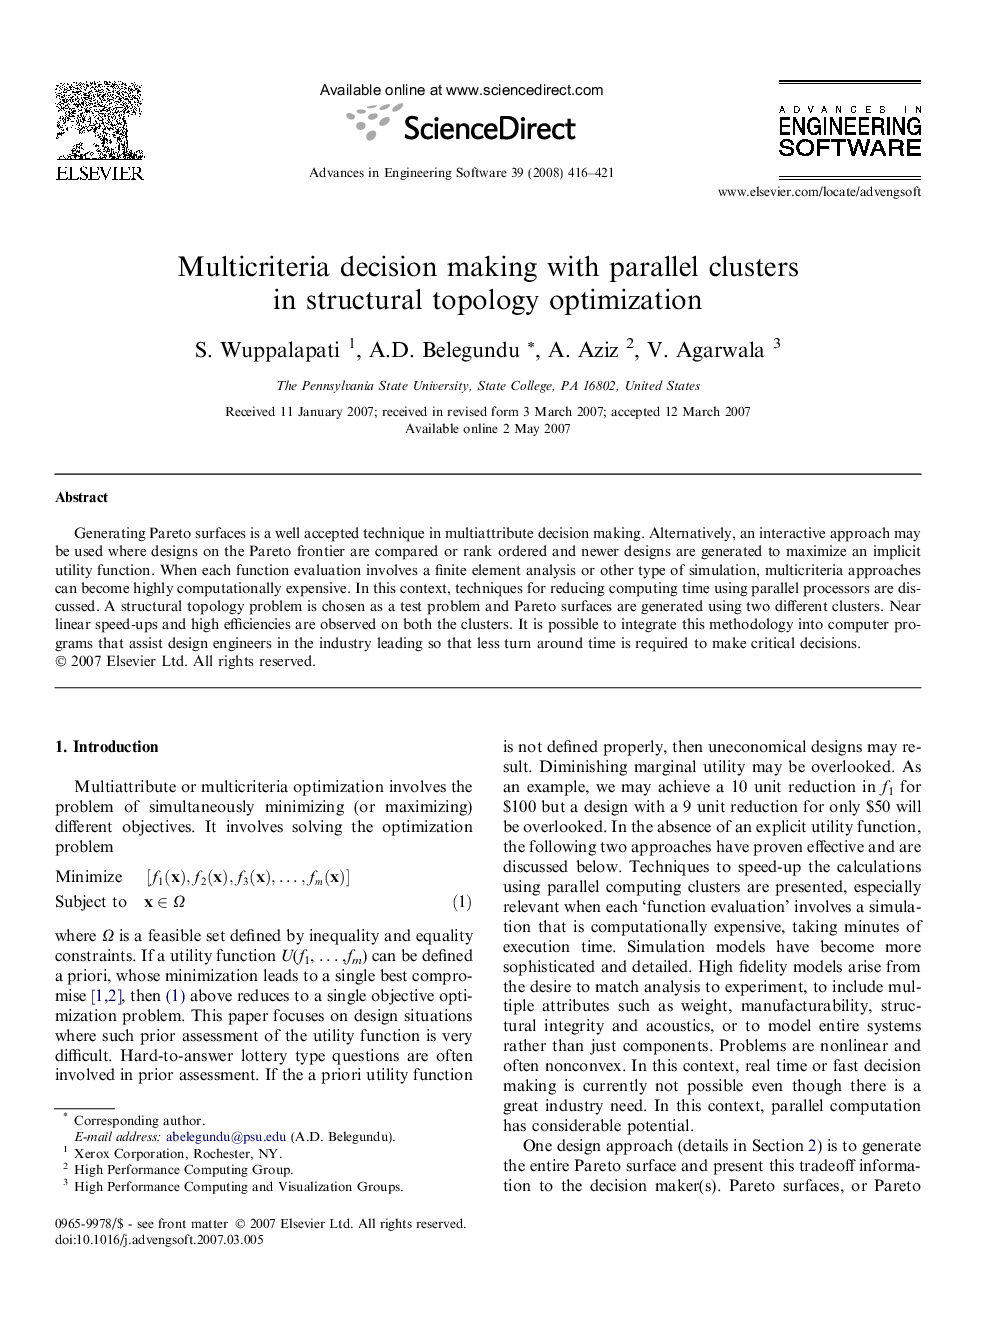 Multicriteria decision making with parallel clusters in structural topology optimization